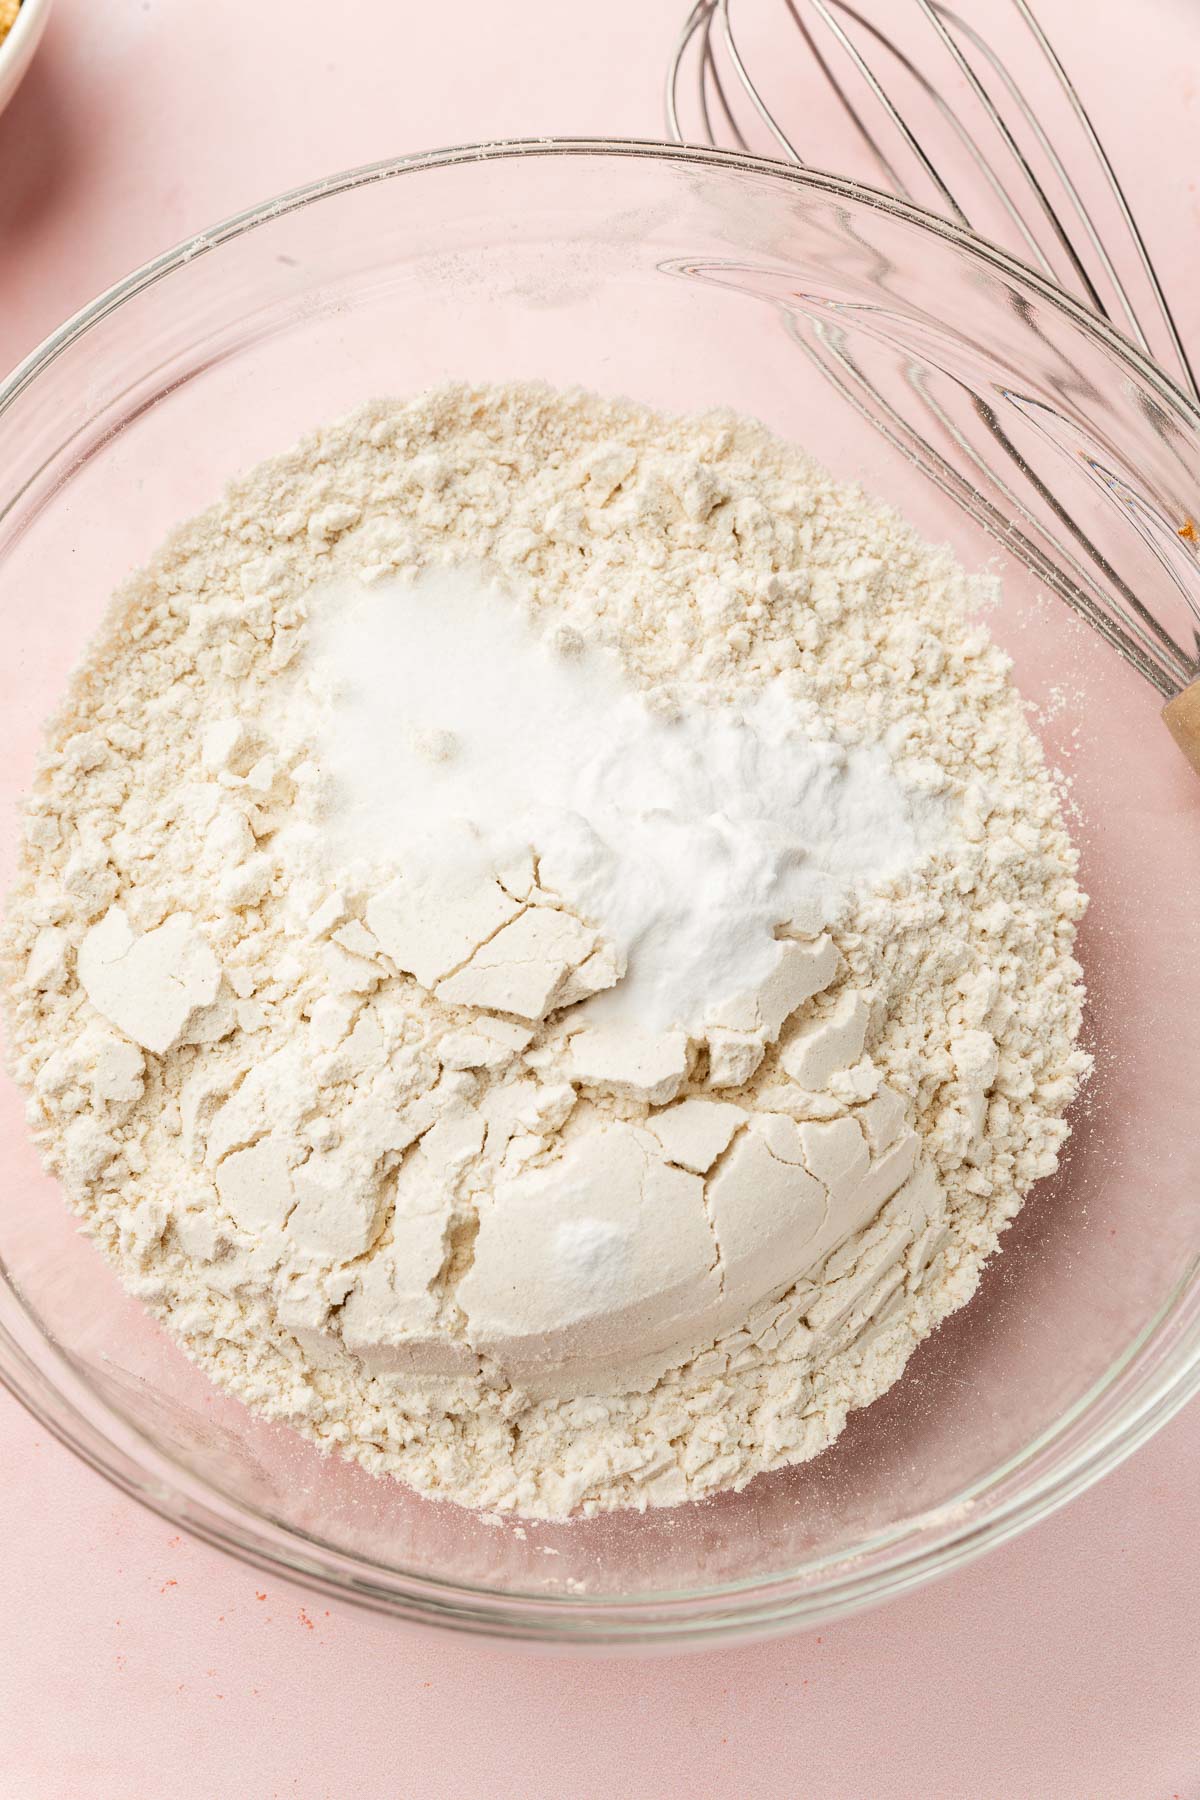 A glass mixing bowl with gluten-free flour, salt and baking soda before being whisked together.